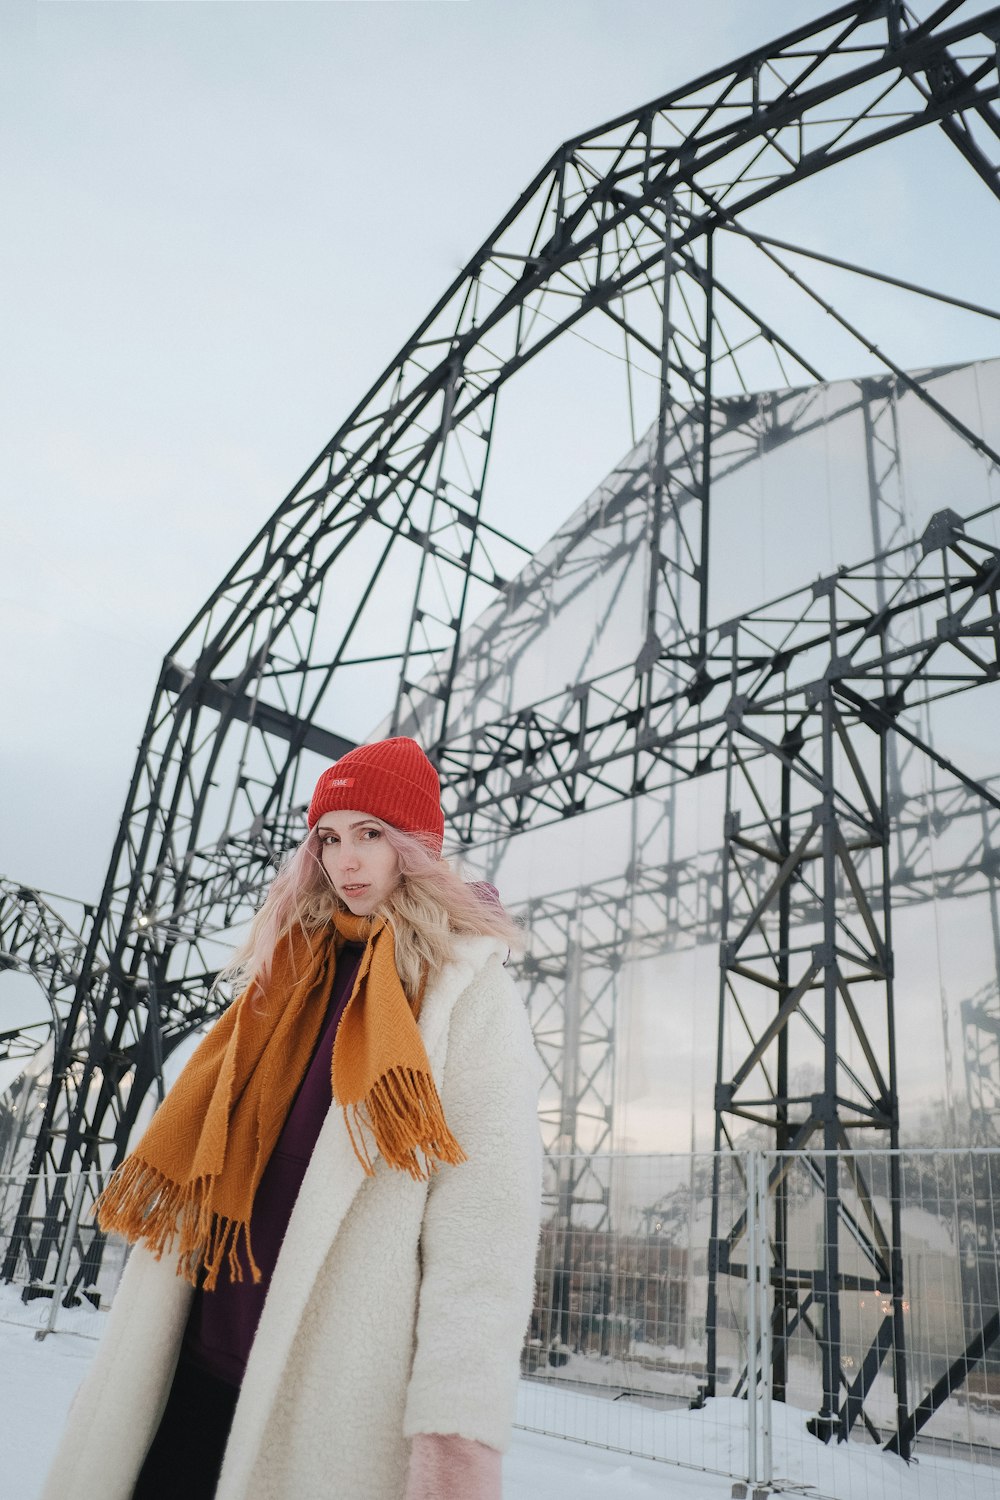 a woman wearing a red hat and scarf standing in front of a metal structure